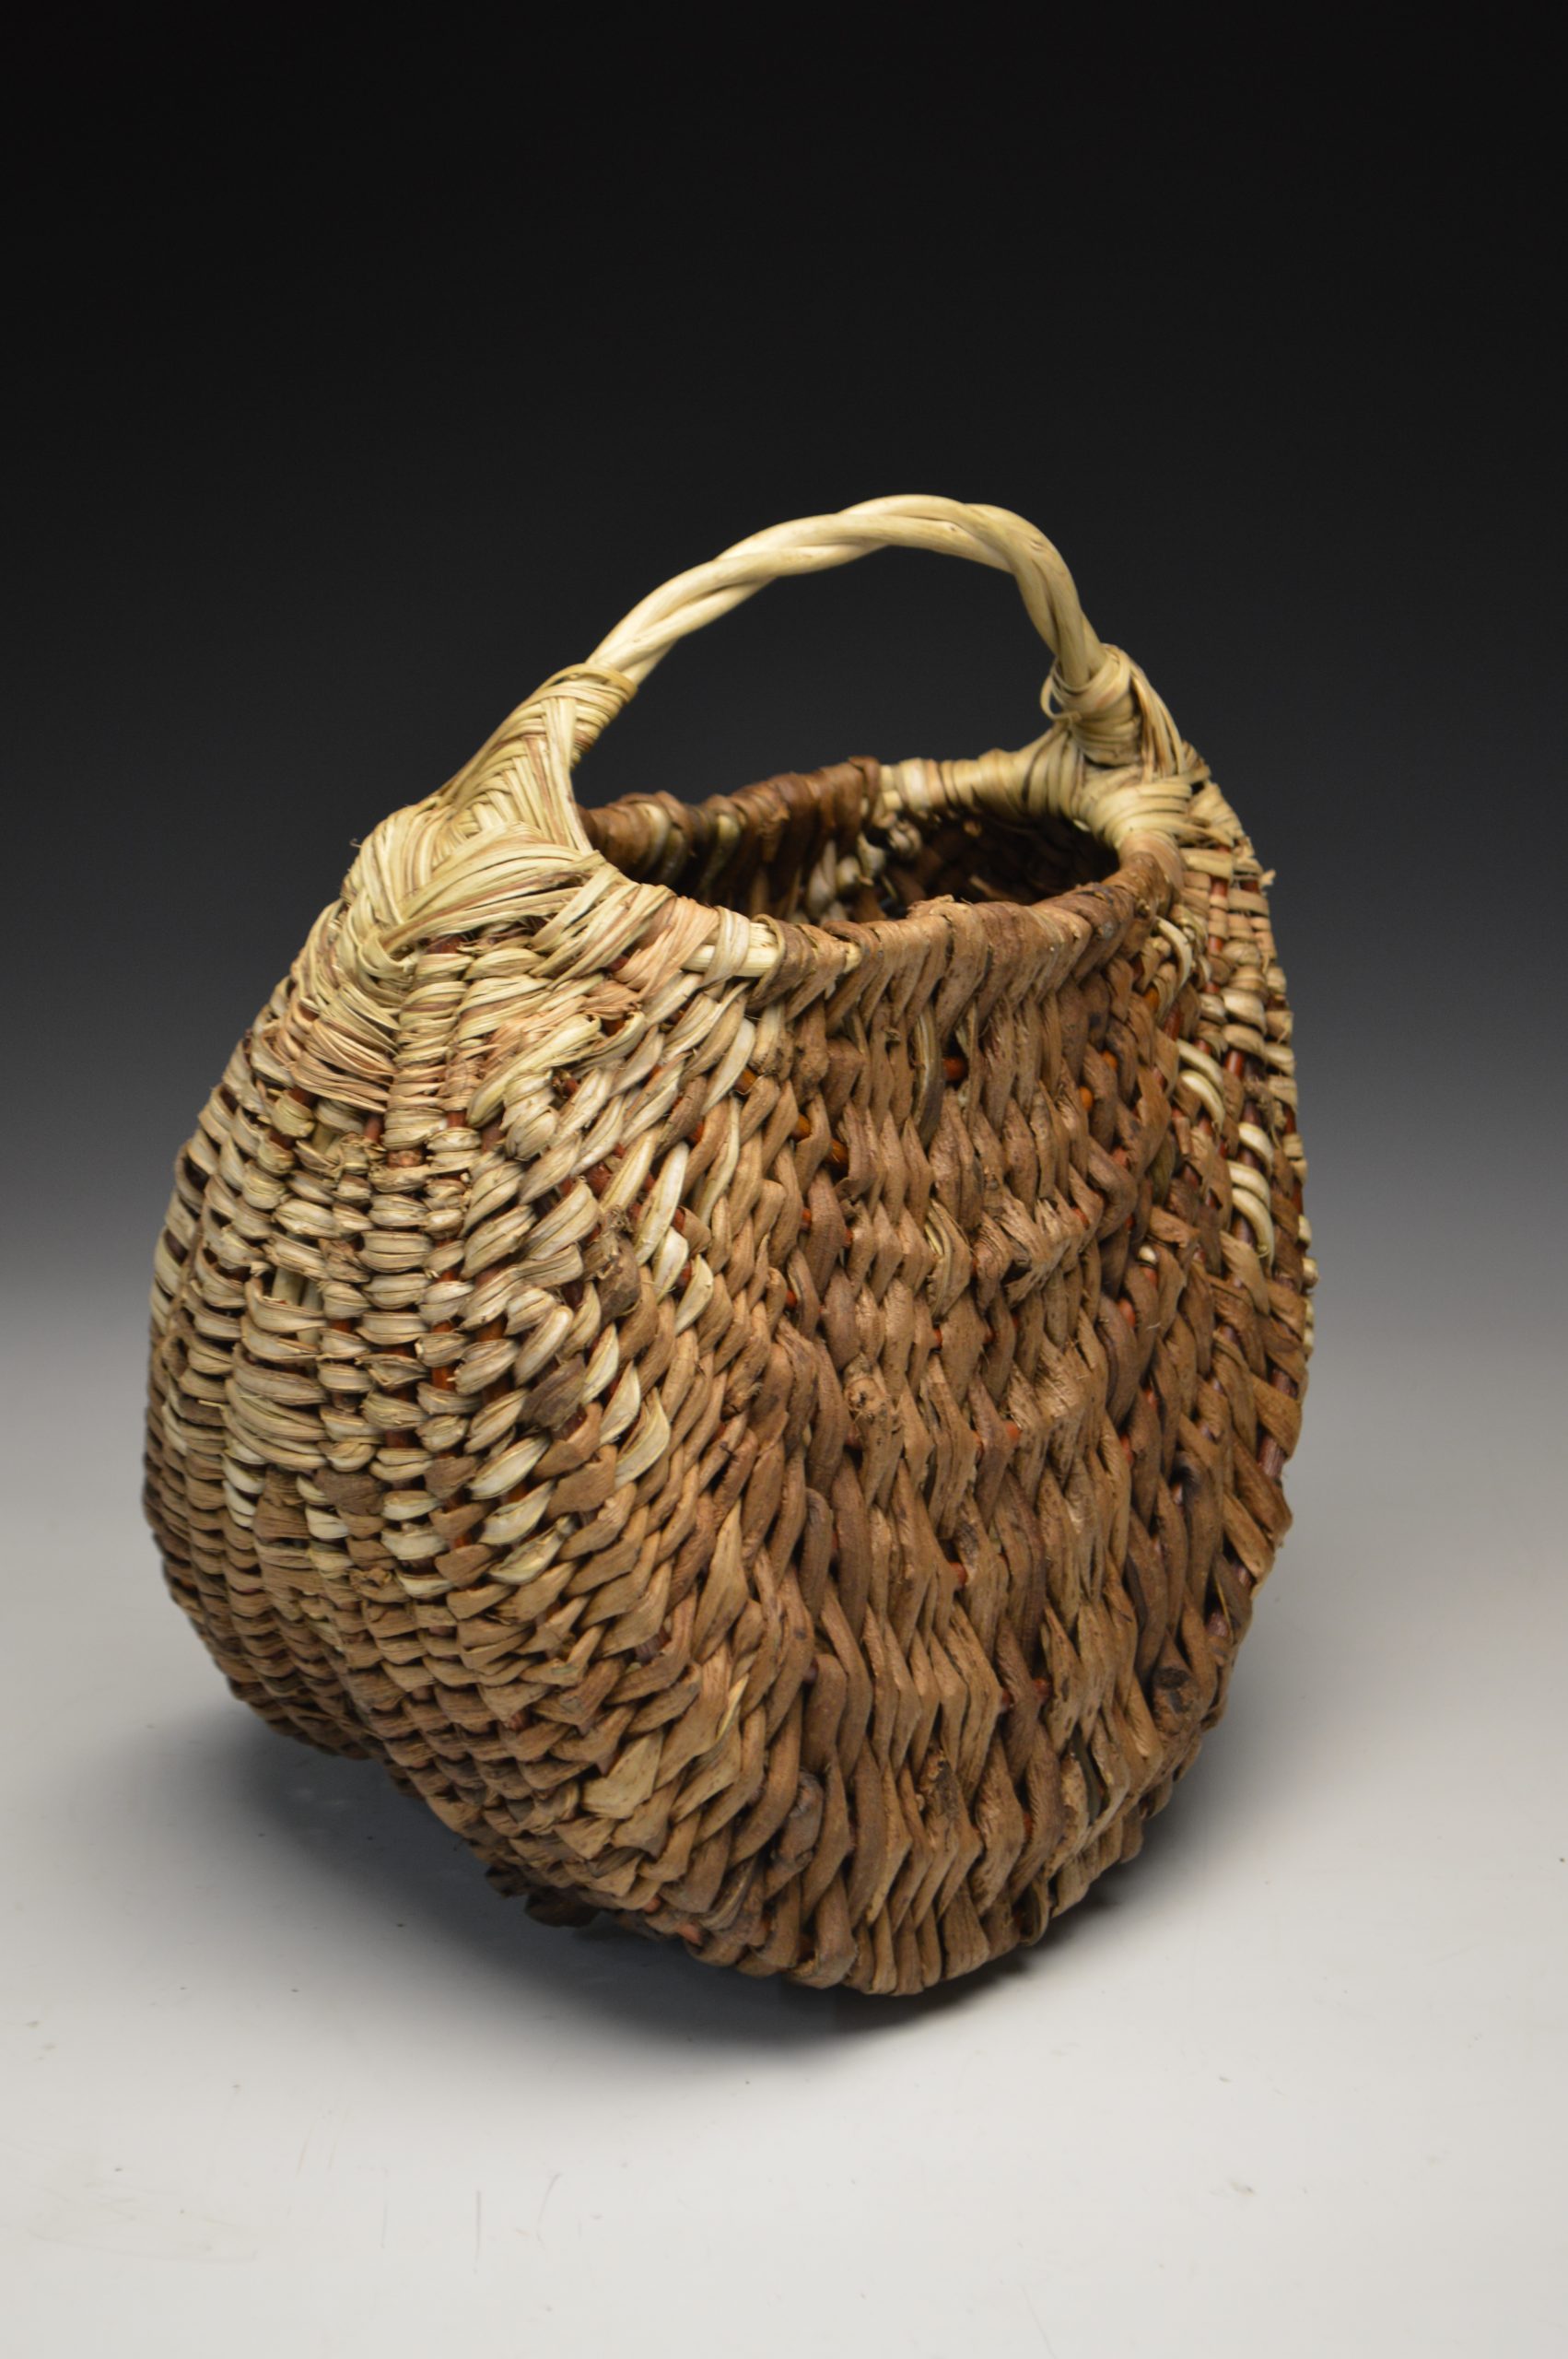 Baskets Galore! A Gallery Of Natural Baskets From My 2015 Internship With Matt Tommey